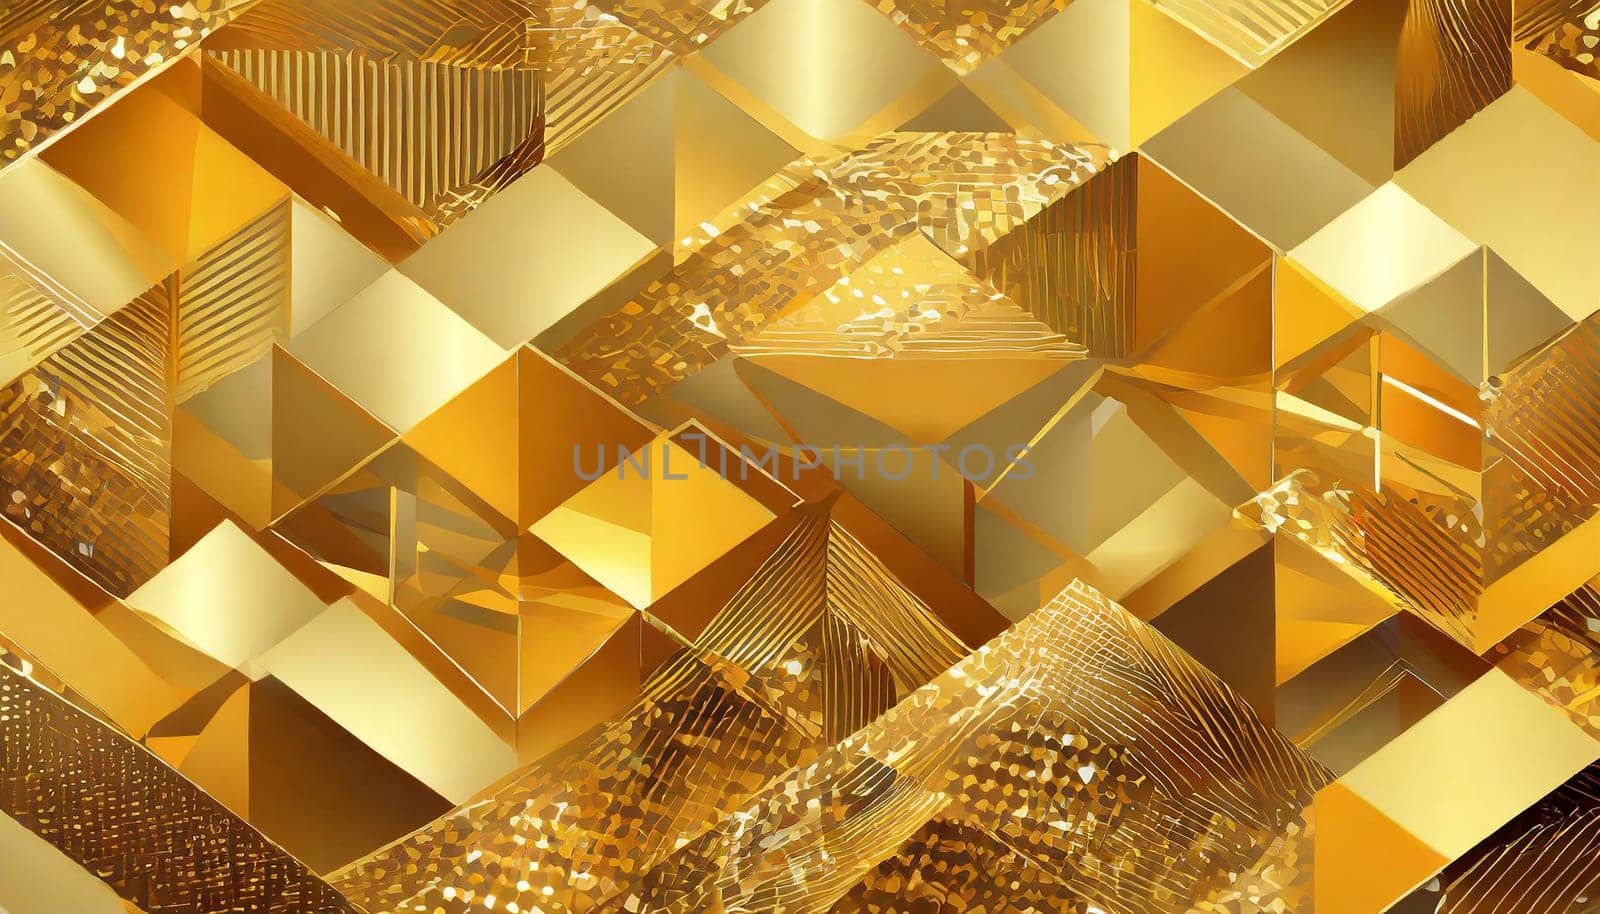 Gold metallic surface, texture with visible diamond-shaped geometric protrusions by stan111